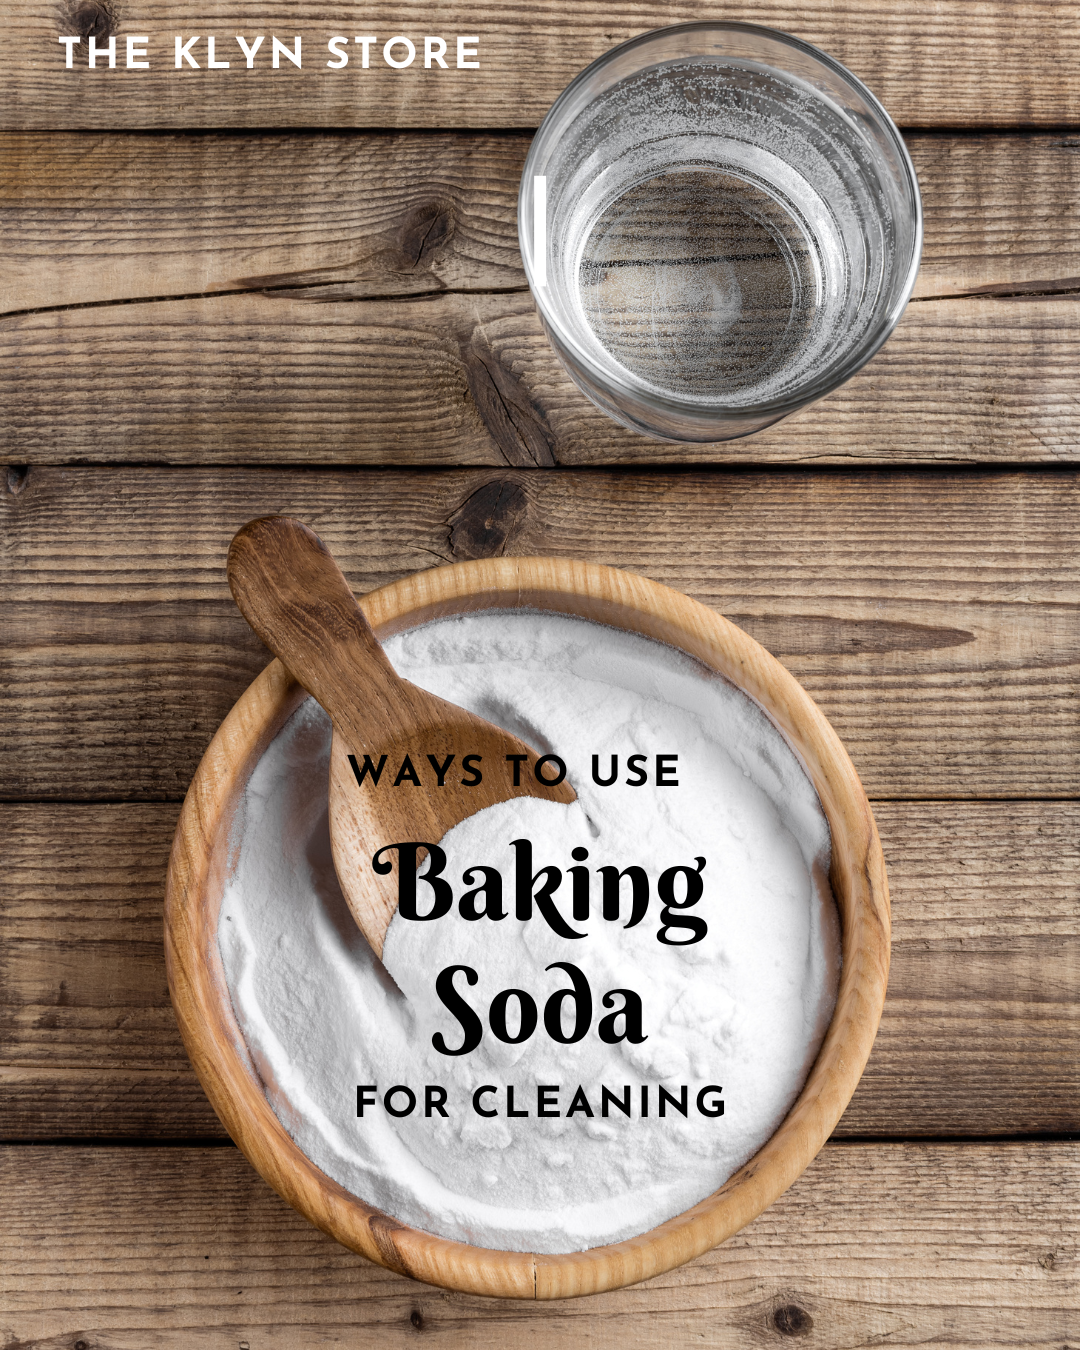 Here's why you need to have baking soda at home: 7 Ingenious Ways to Harness the Power of Baking Soda for Cleaning